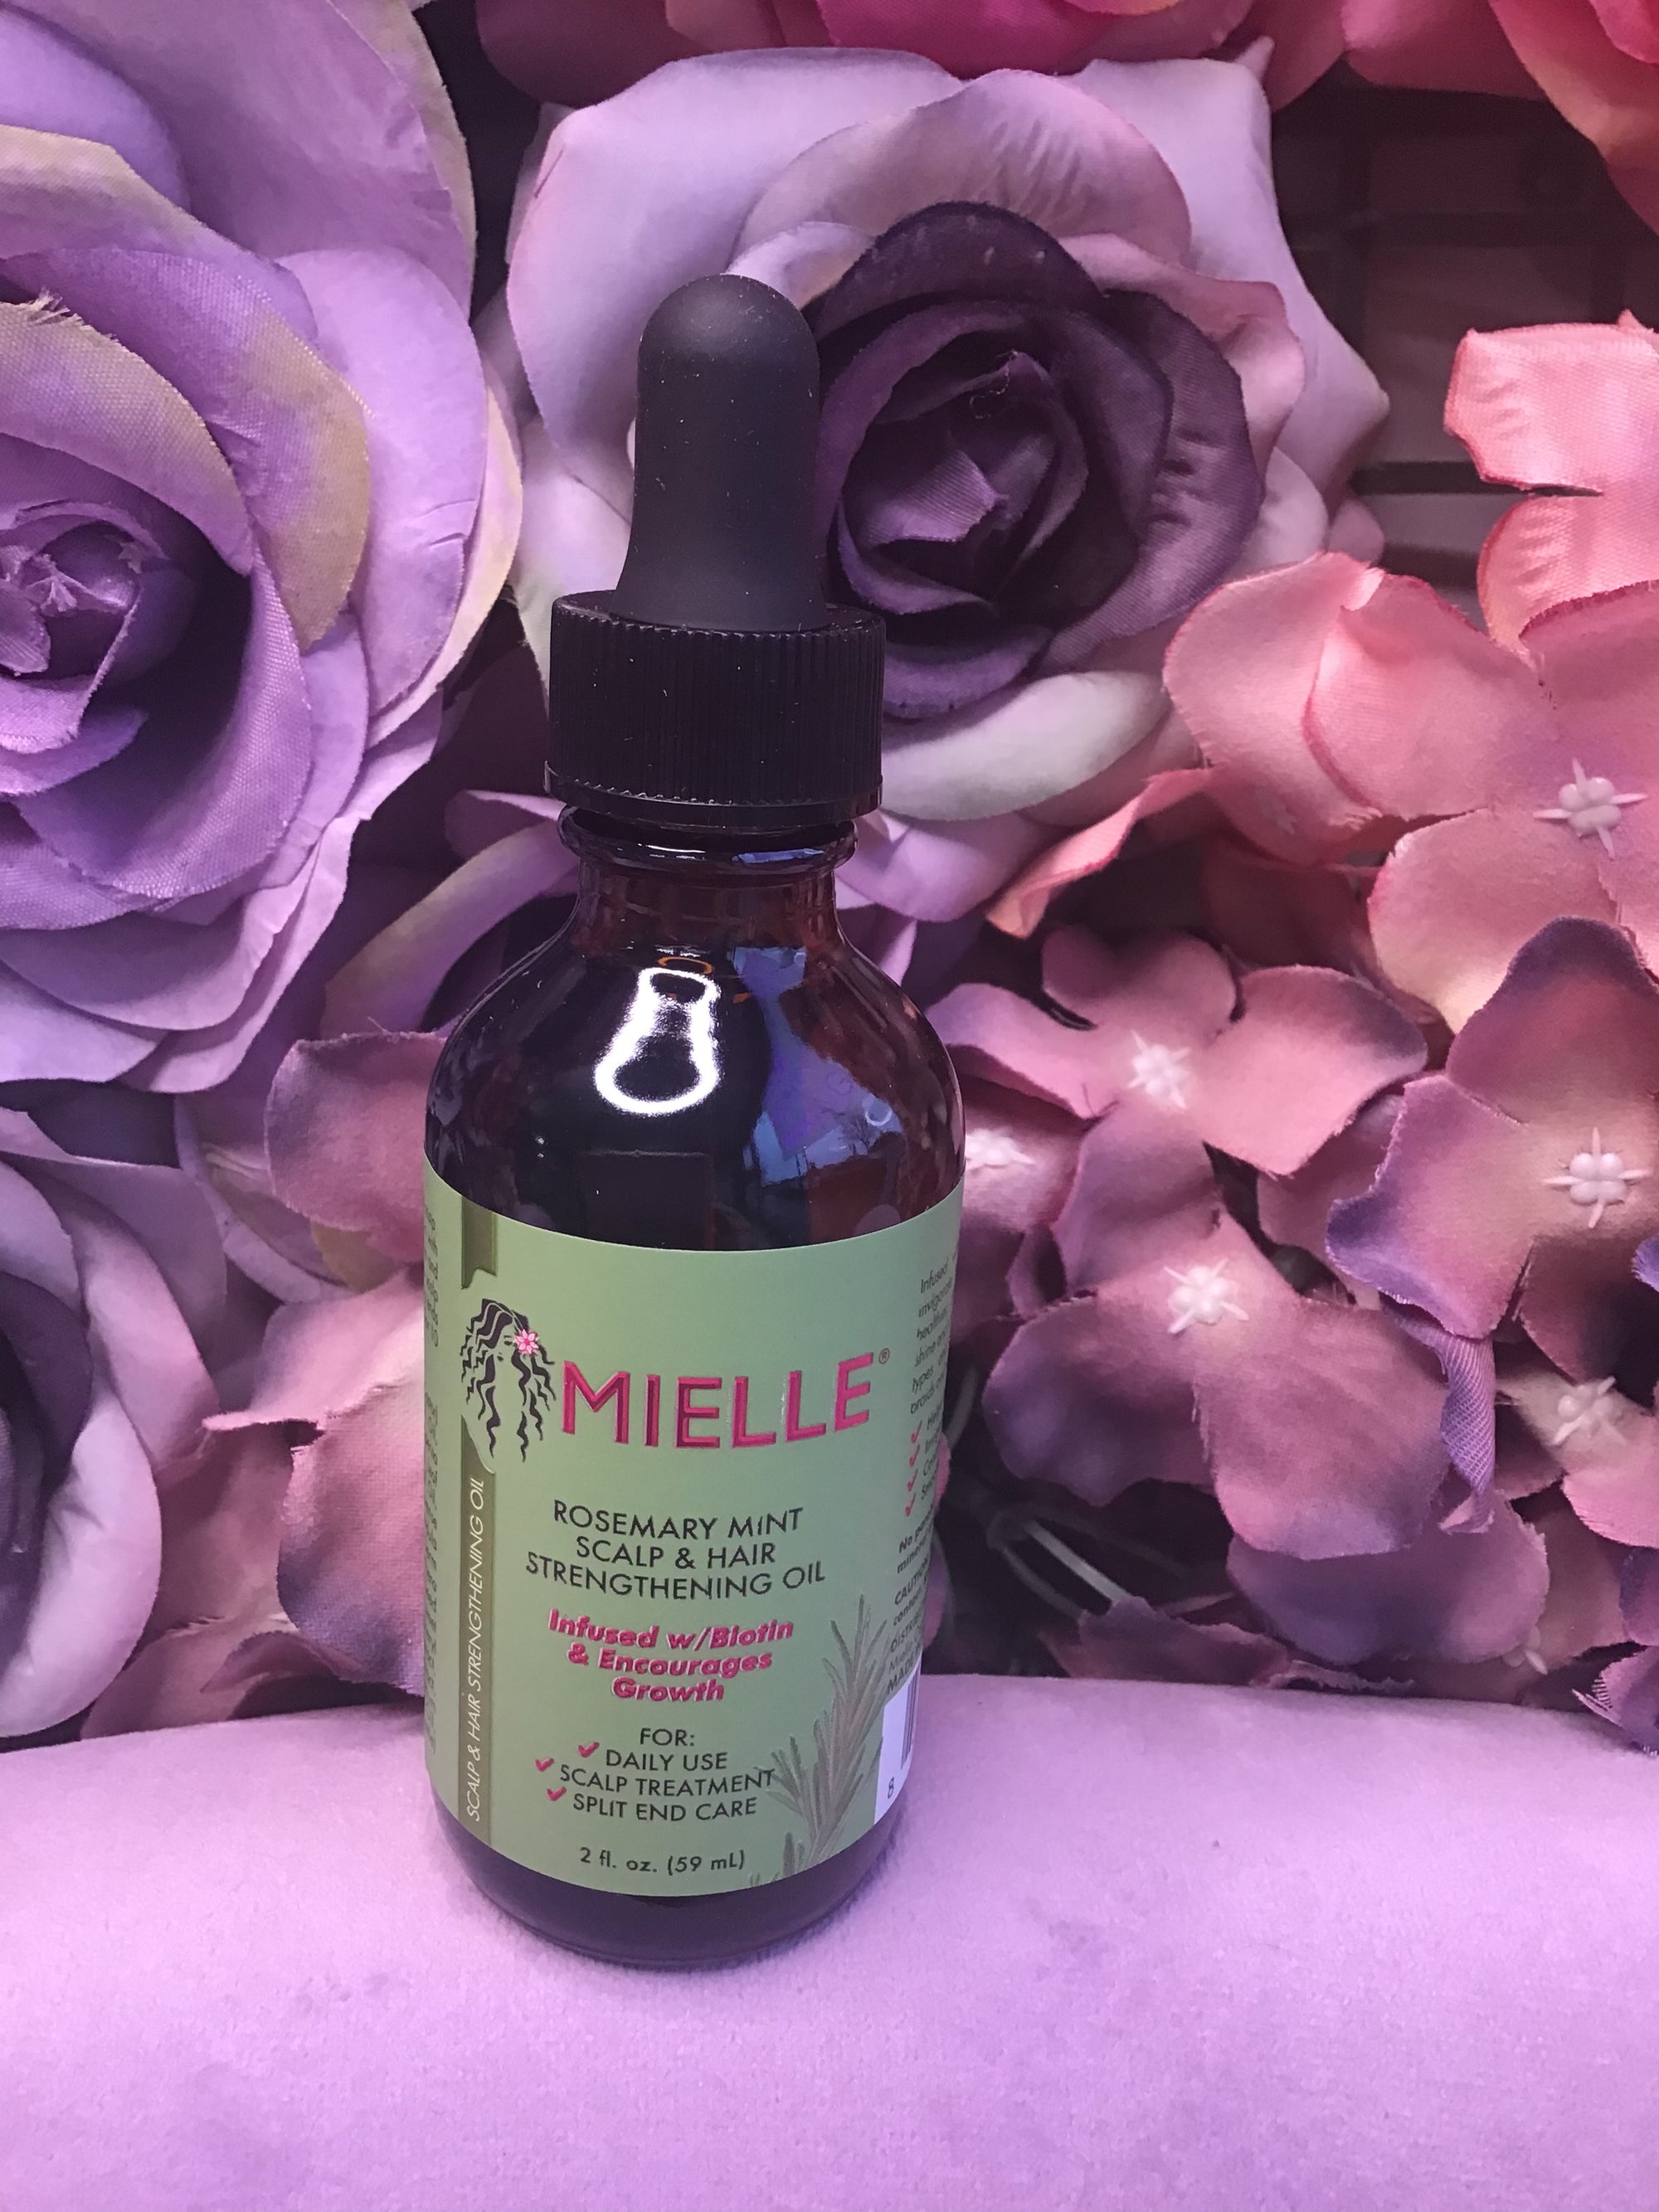 The Mielle Organics Rosemary Mint Oil has BLOWN UP for a reason .. and heres why !!